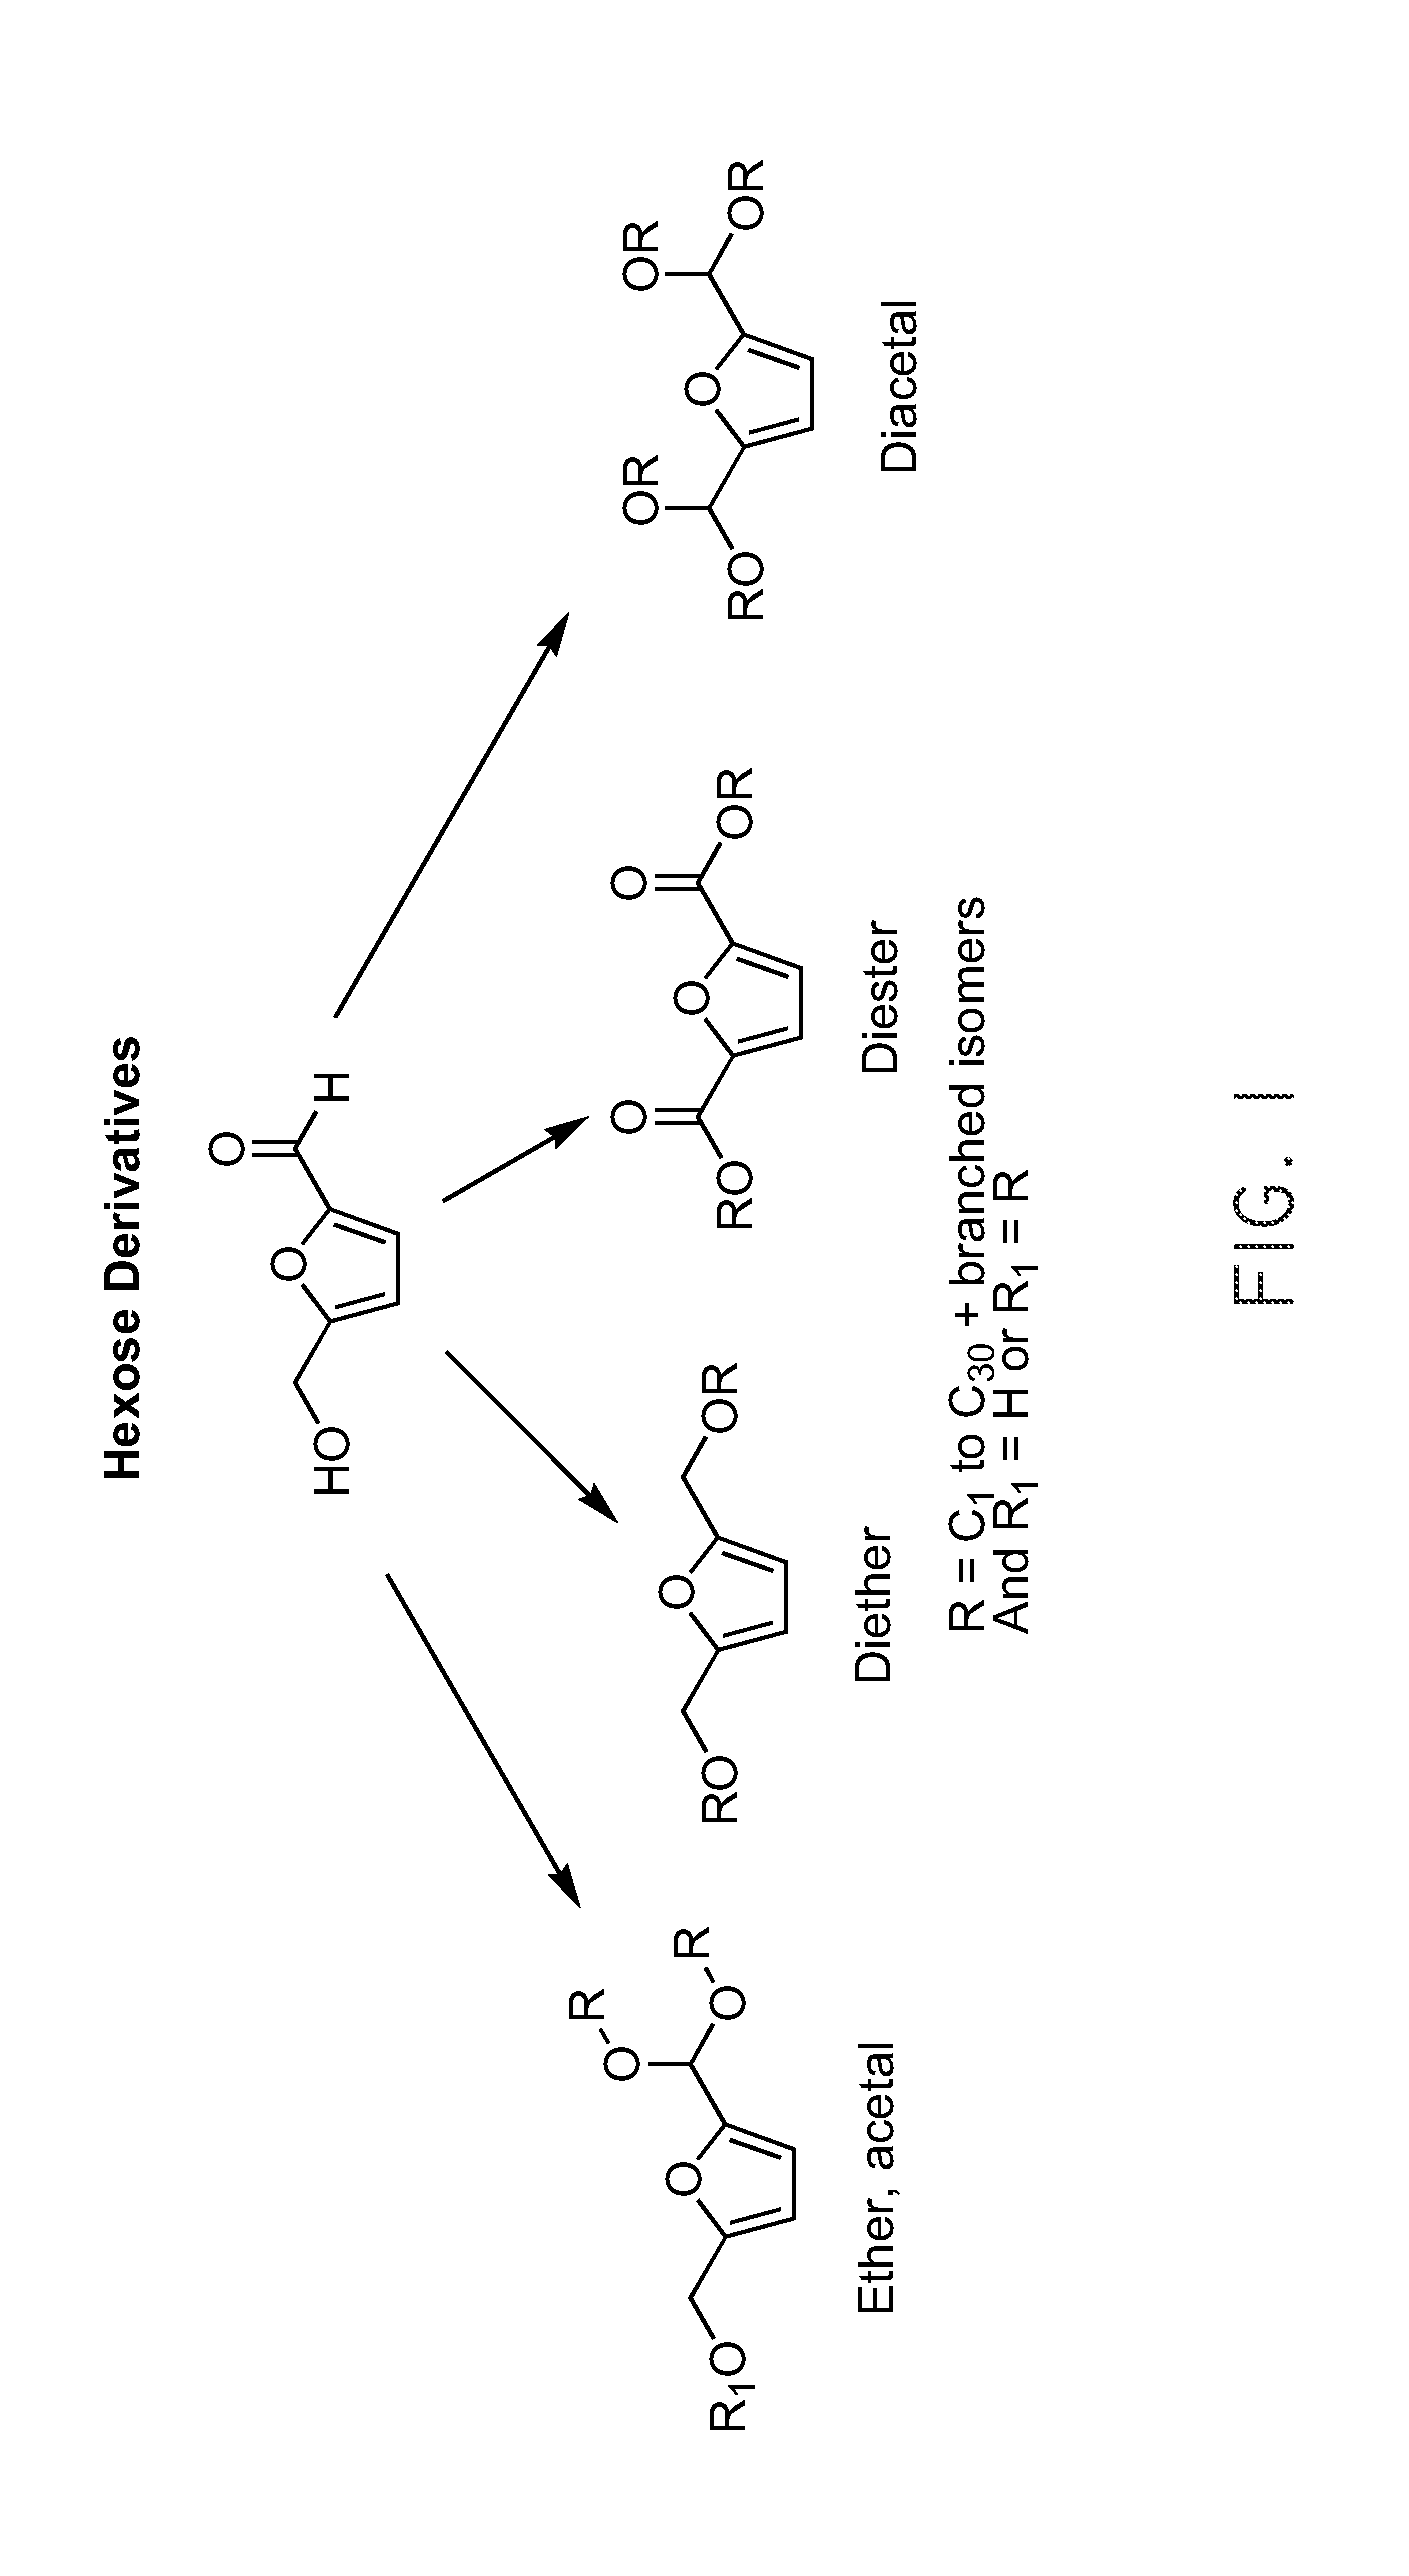 Systems and methods for producing fuels and fuel precursors from carbohydrates